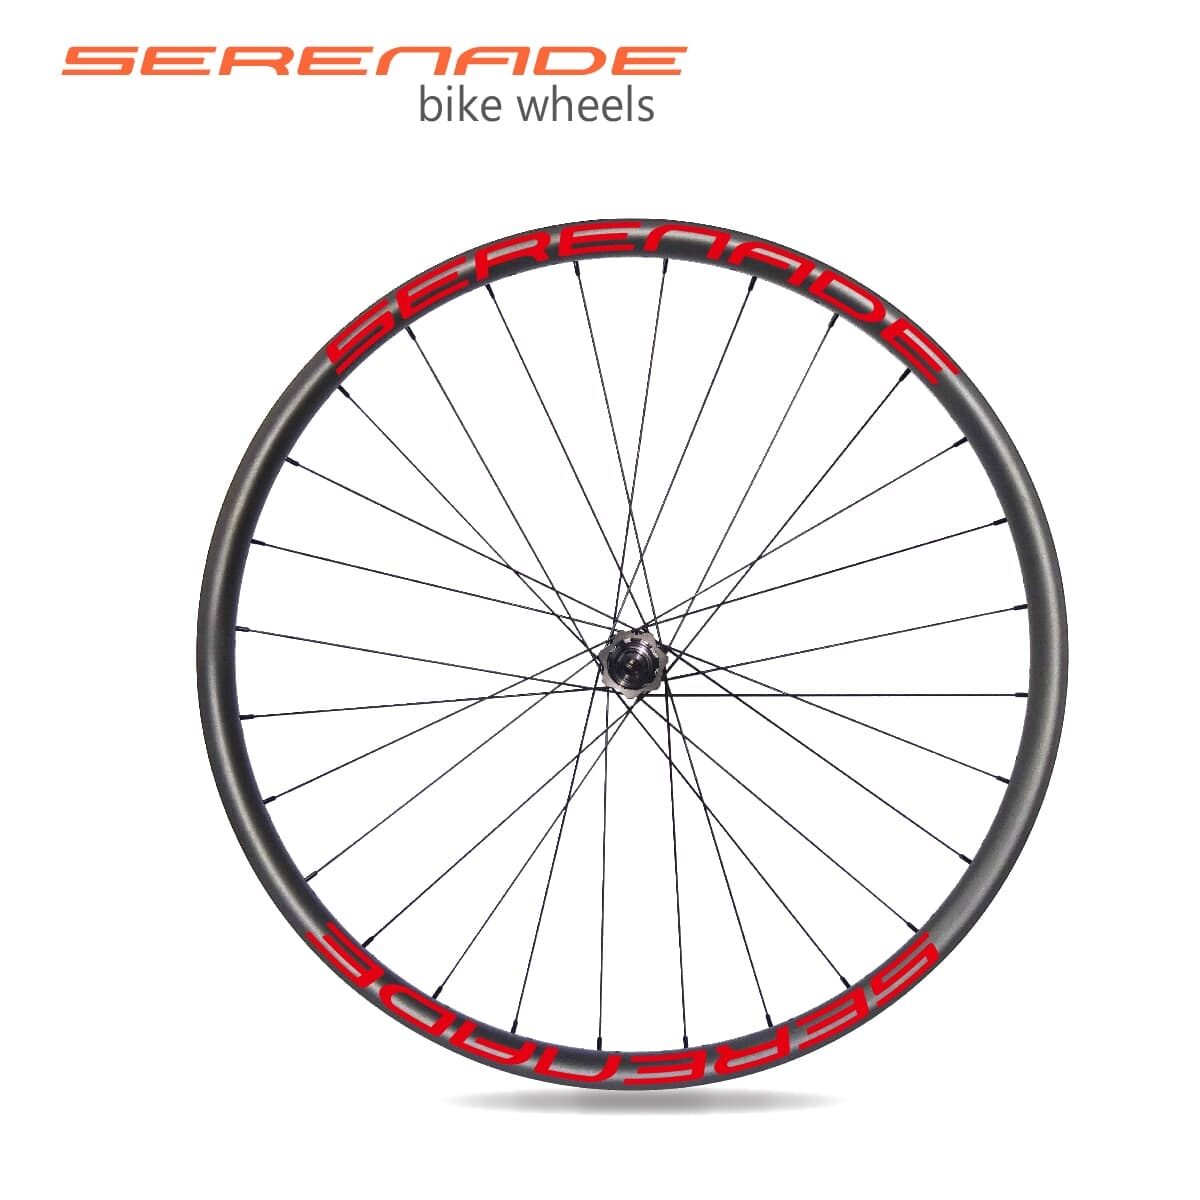 1230g 24mm wide 24mm deep carbon 29er 650b mountain bicycle rims with DT swiss 350 mtb bike wheels 1230gr 24mm carbon mountain bicycle wheelset 29er 650 mtb bike wheels